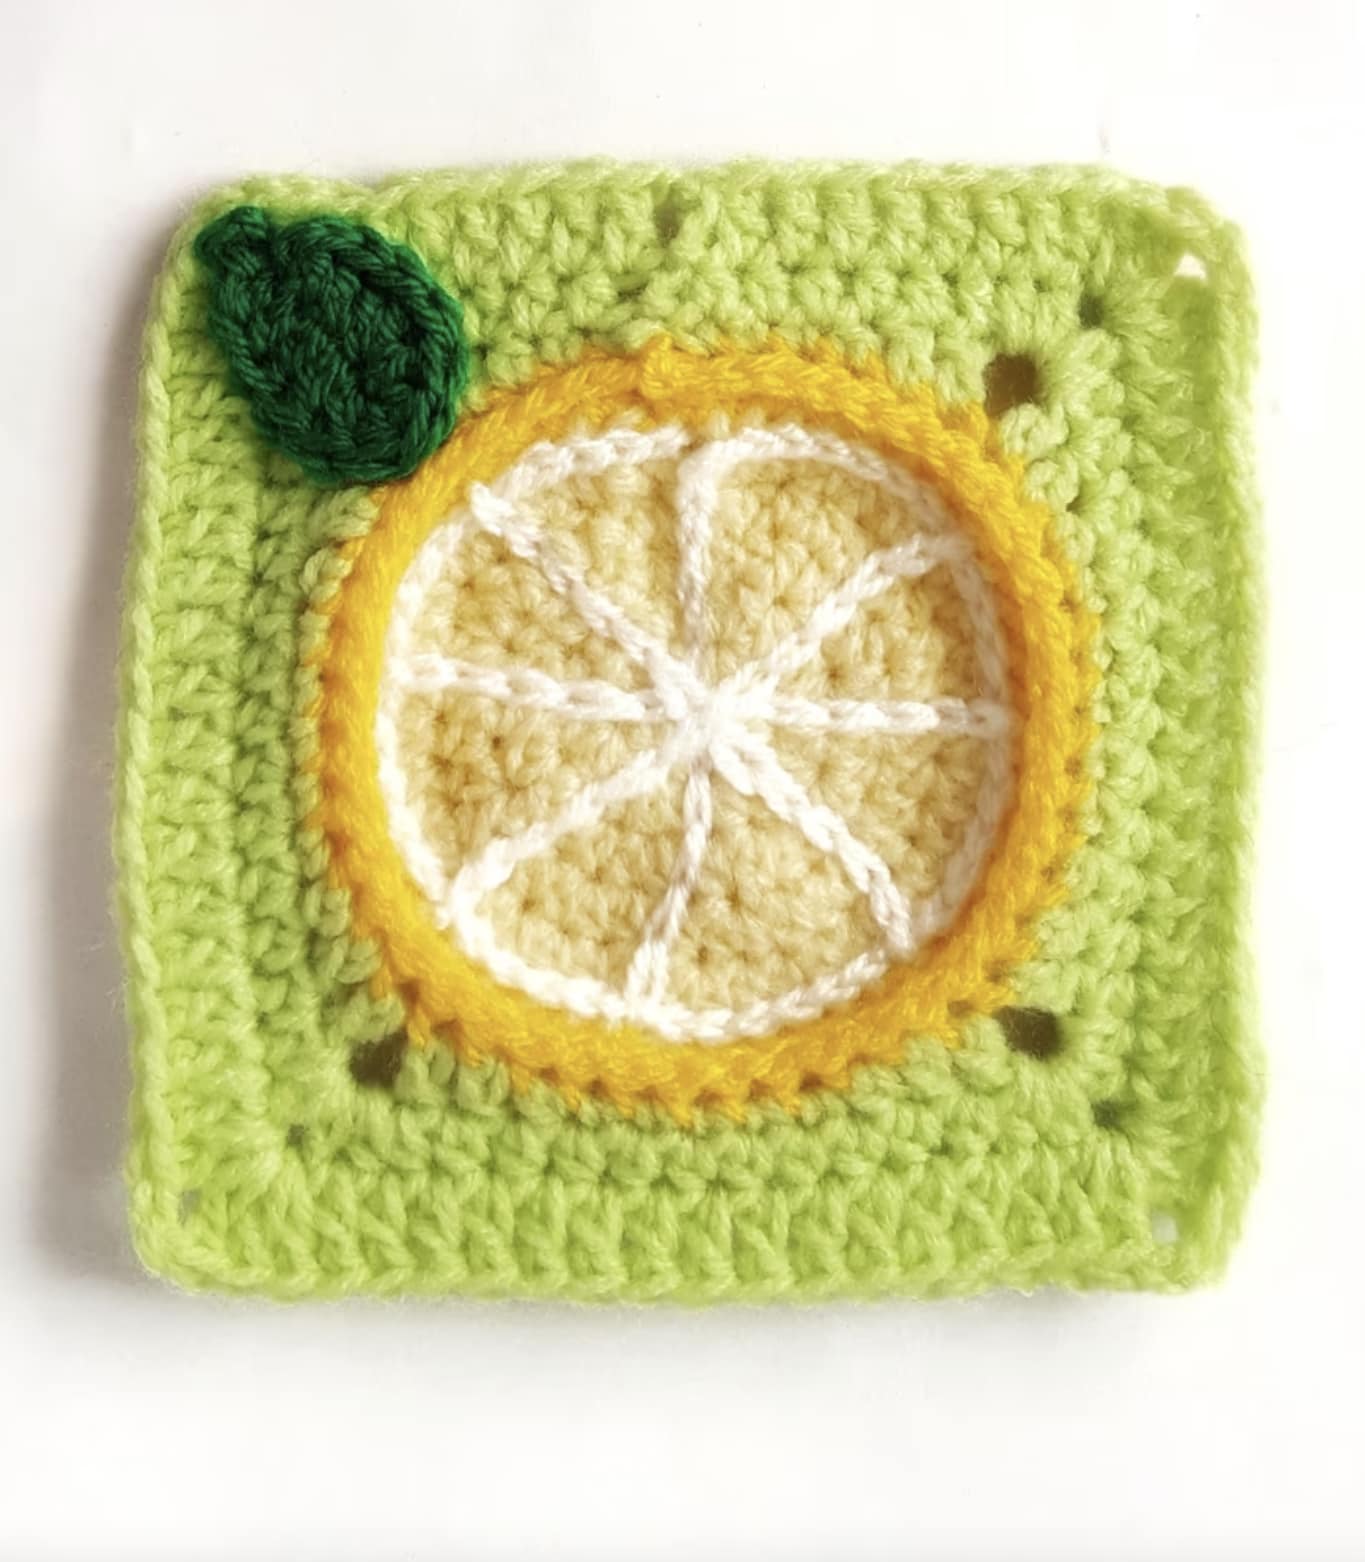 lemon granny square crochet pattern with 3d surface crochet - get it for free now